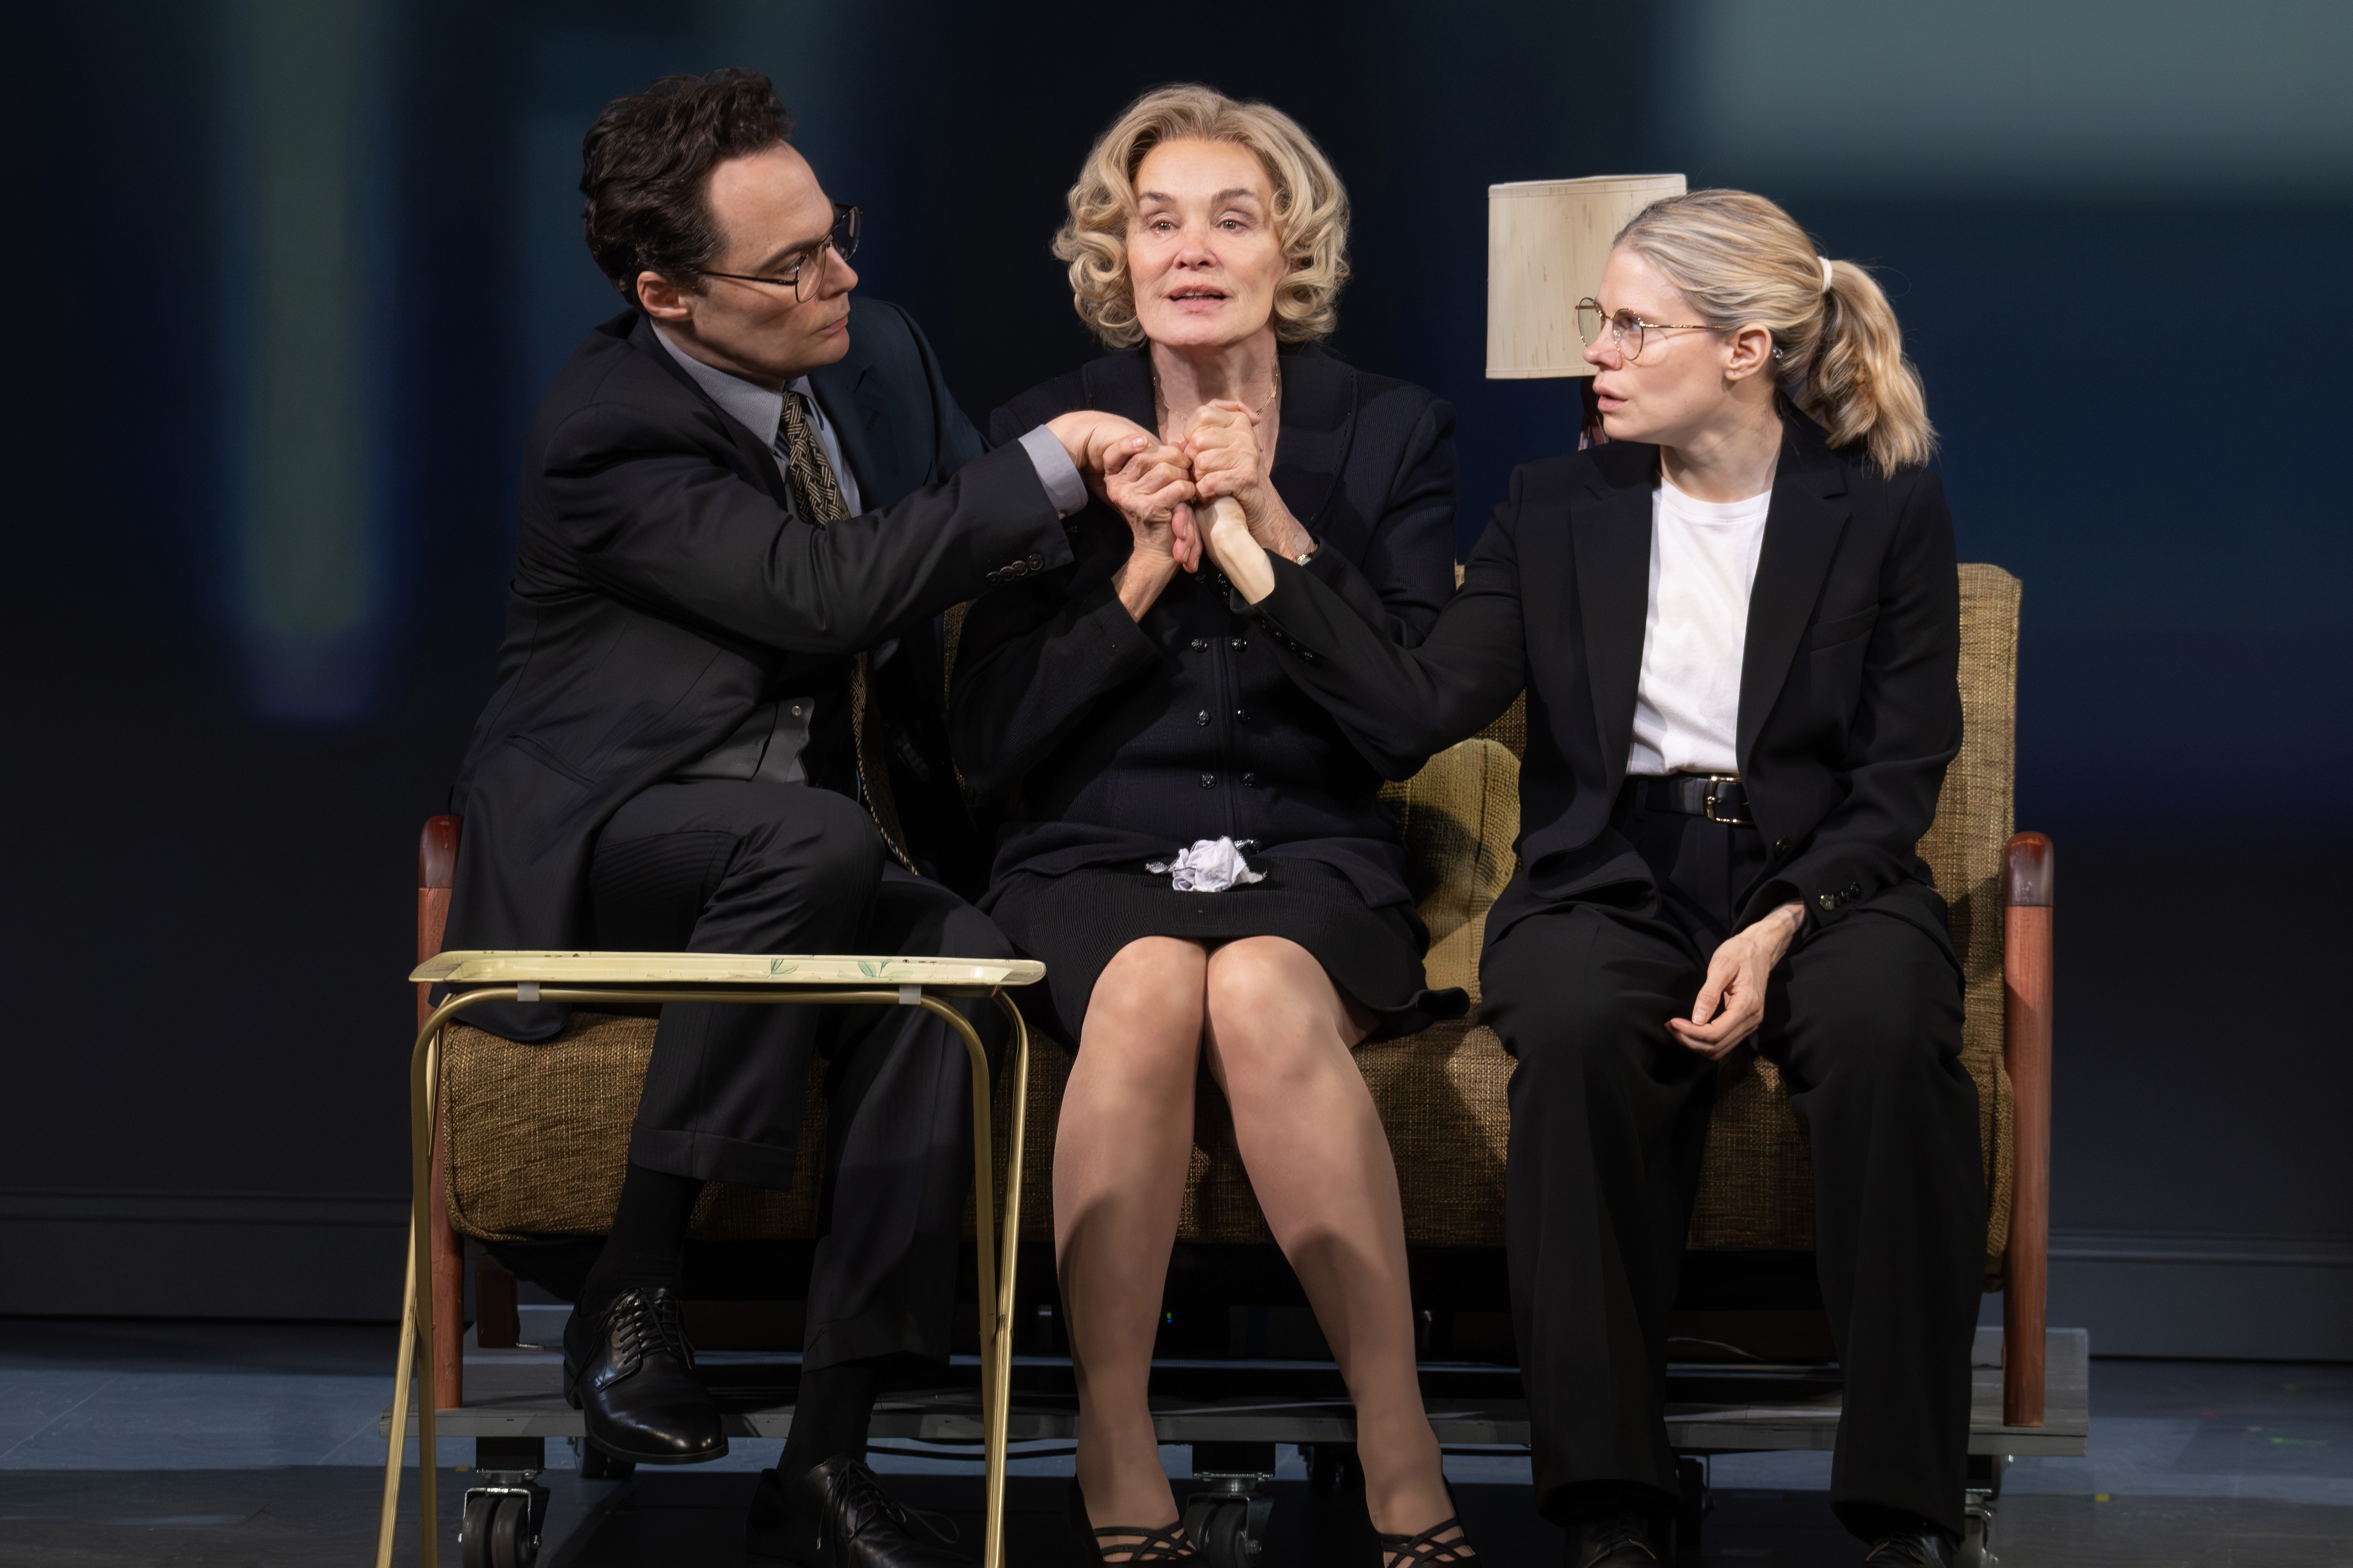 MOTHER PLAY
A PLAY IN FIVE EVICTIONS
BY
PAULA VOGEL
DIRECTED BY
TINA LANDAU
 
WITH
CELIA KEENAN BOLGER, JESSICA LANGE, JIM PARSONS